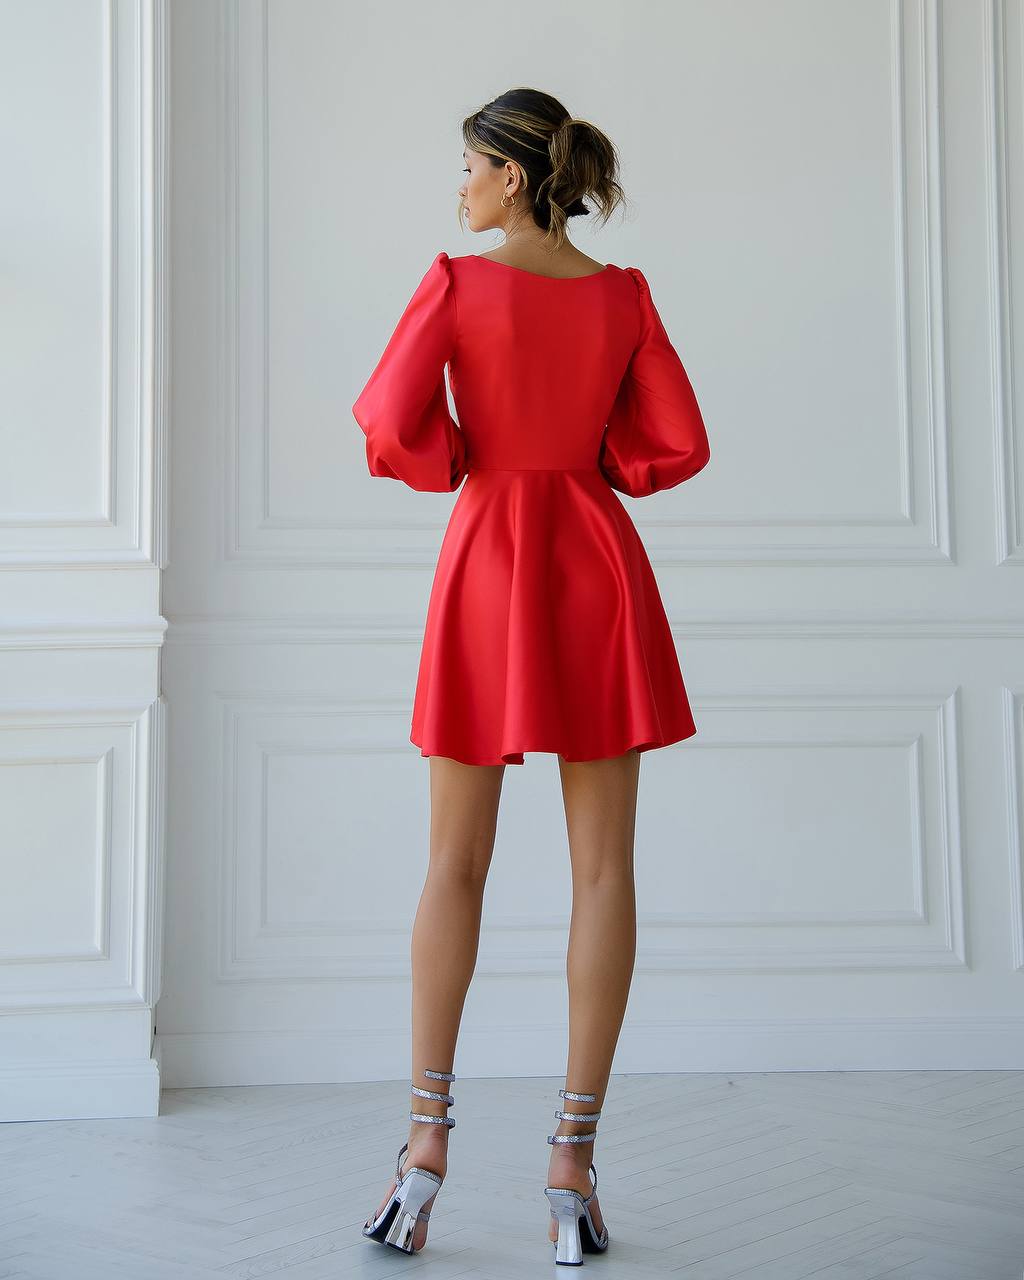 a woman in a red dress standing in front of a white wall